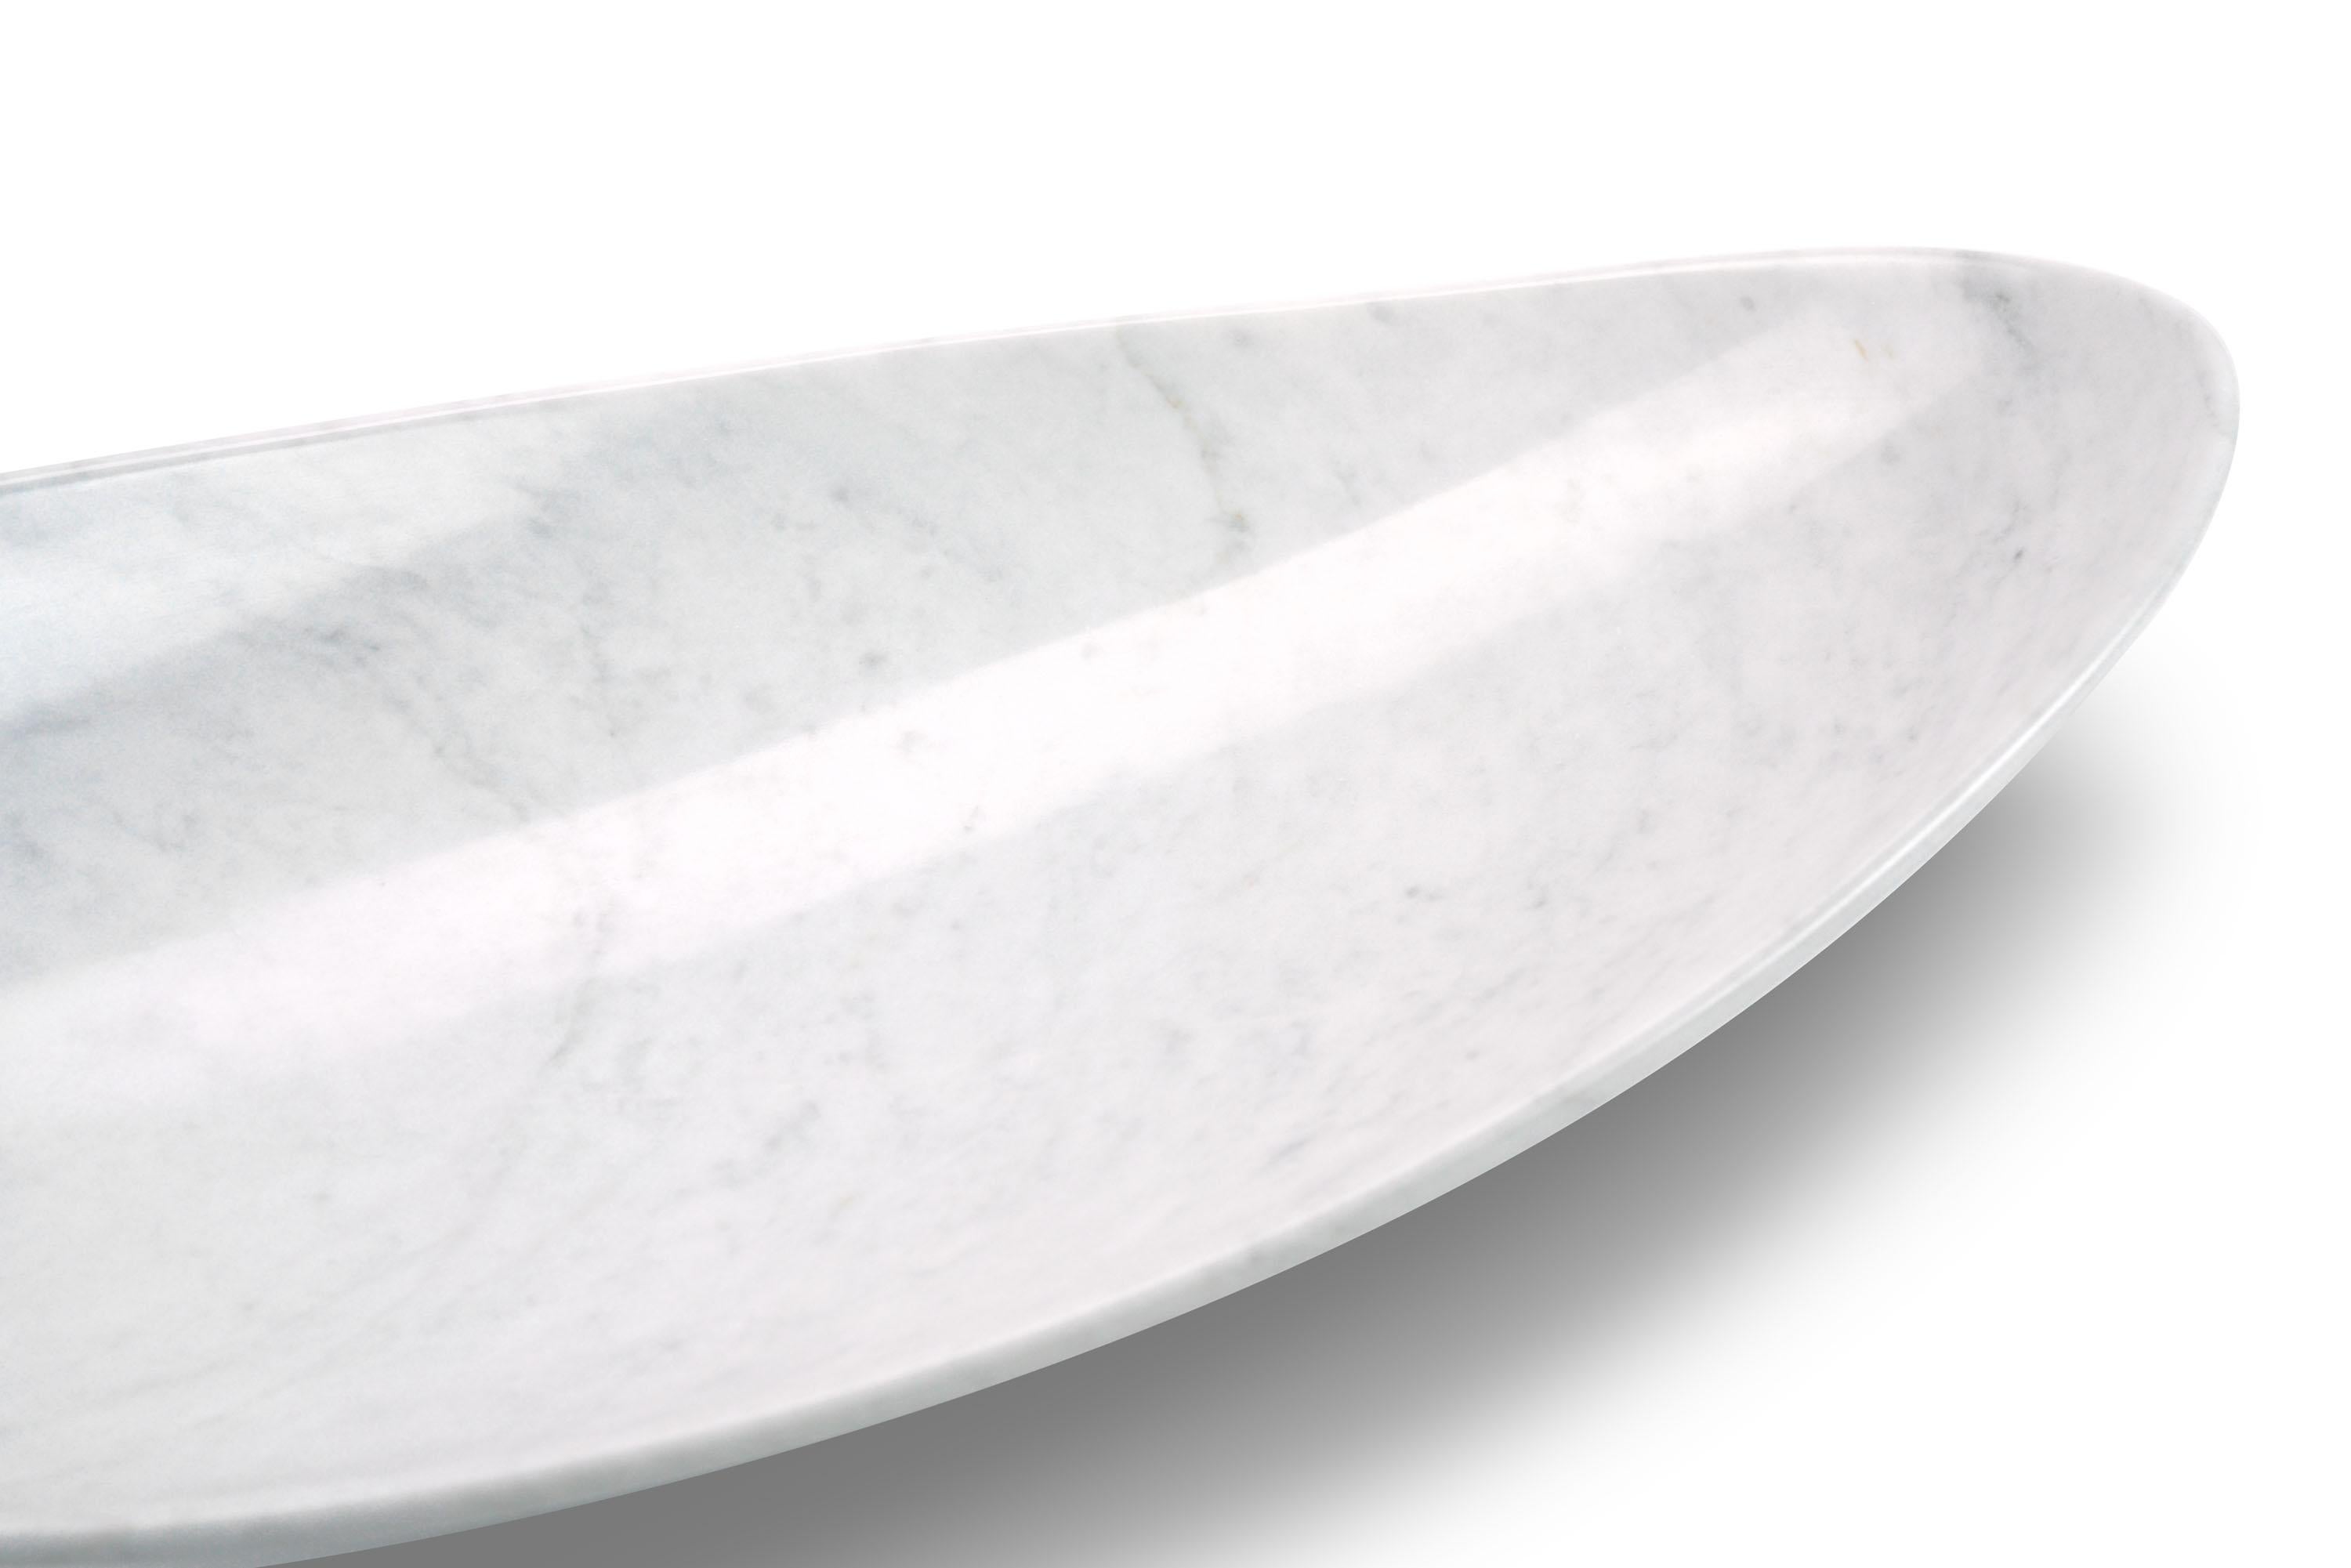 Bowl sculpted by hand from a solid block of white Carrara marble. Polish finishing. 

Dimensions: Big L 56 x  W 27 x  H 12 cm. 
Also availabe: Small L 35 x  W 17 x H 8 cm and Medium L 45 x W 22 x H 10 cm. 
Available in different marbles, onyx and